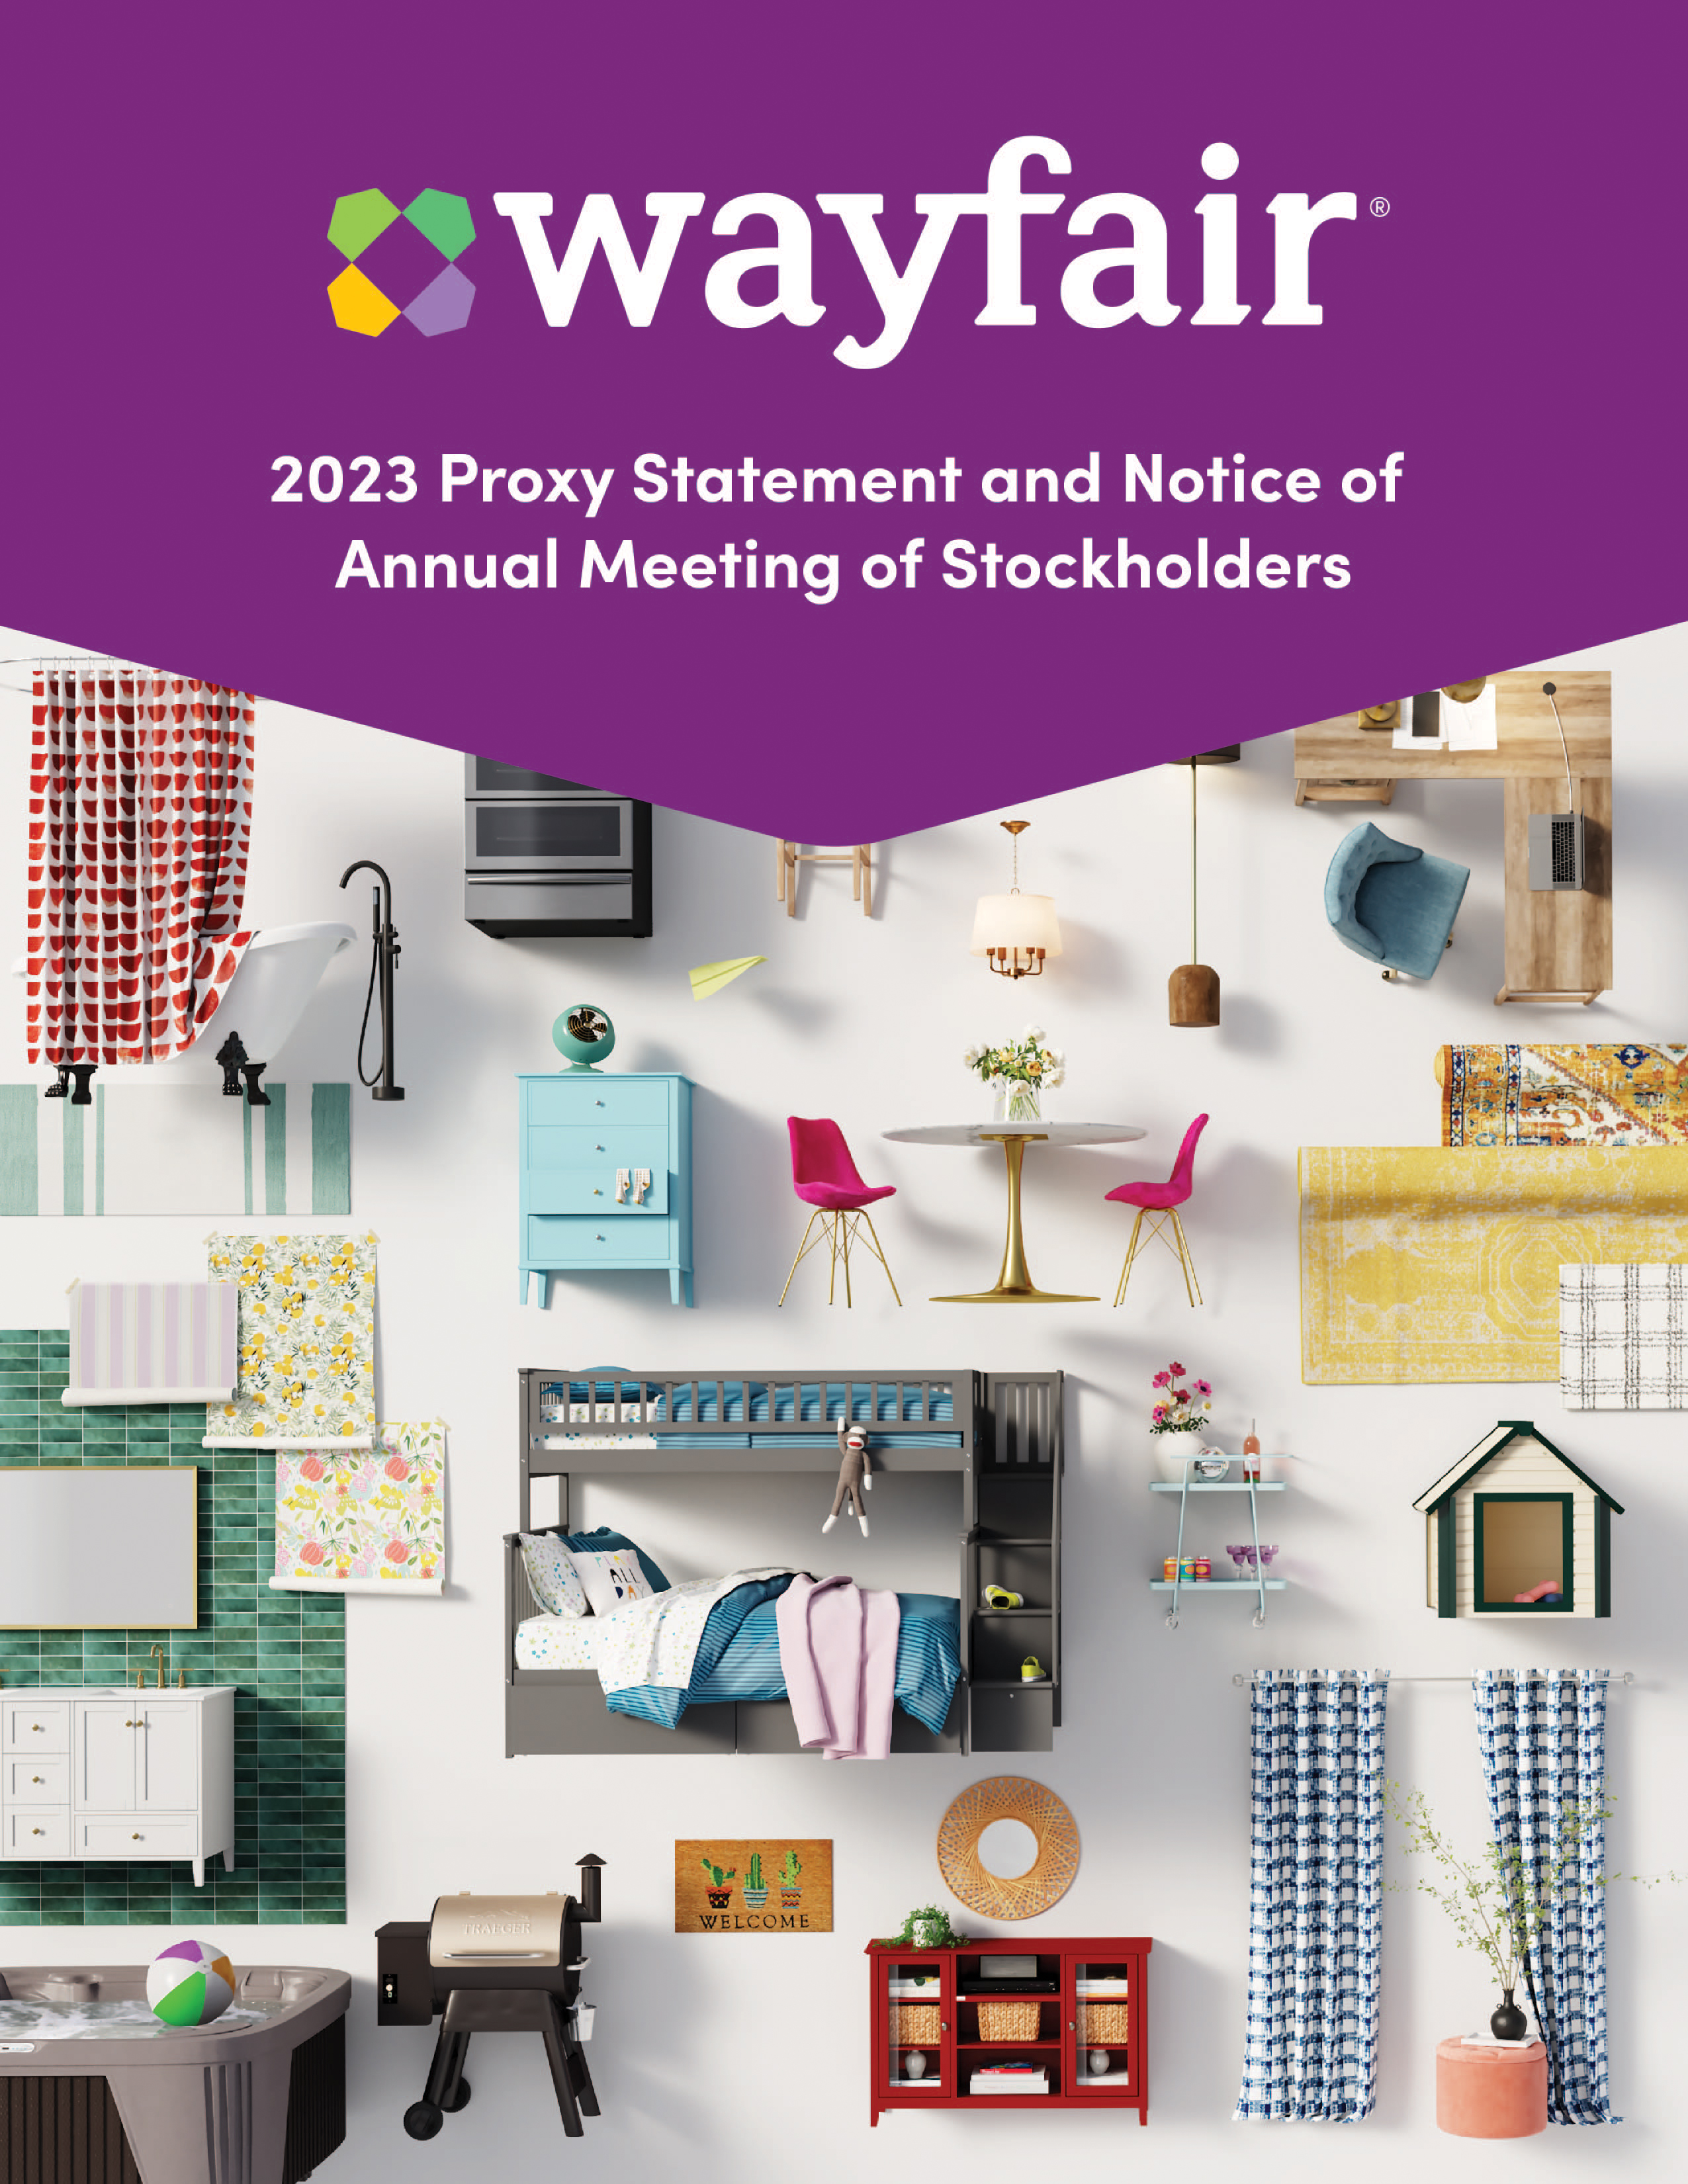 Notice of the 2021 Annual Meeting of Stockholders and Proxy Statement